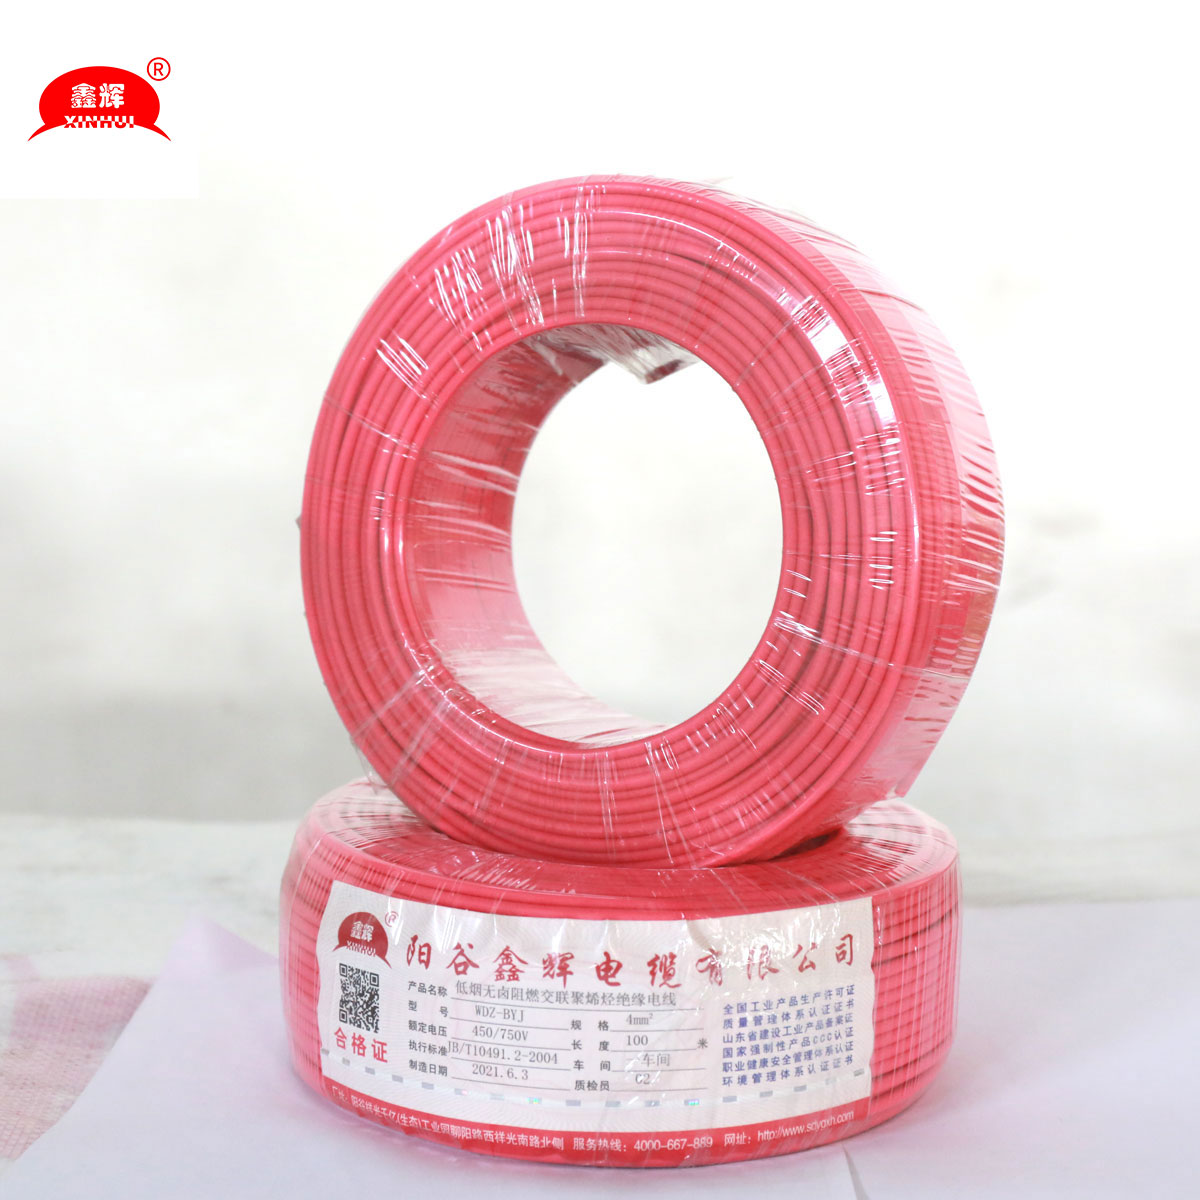 Bv Wire Wires Hot 1.5mm 2.5mm 4mm 6mm 10mm Single Core BV House Wiring Electrical Cable And Wire Price Electrical Wires